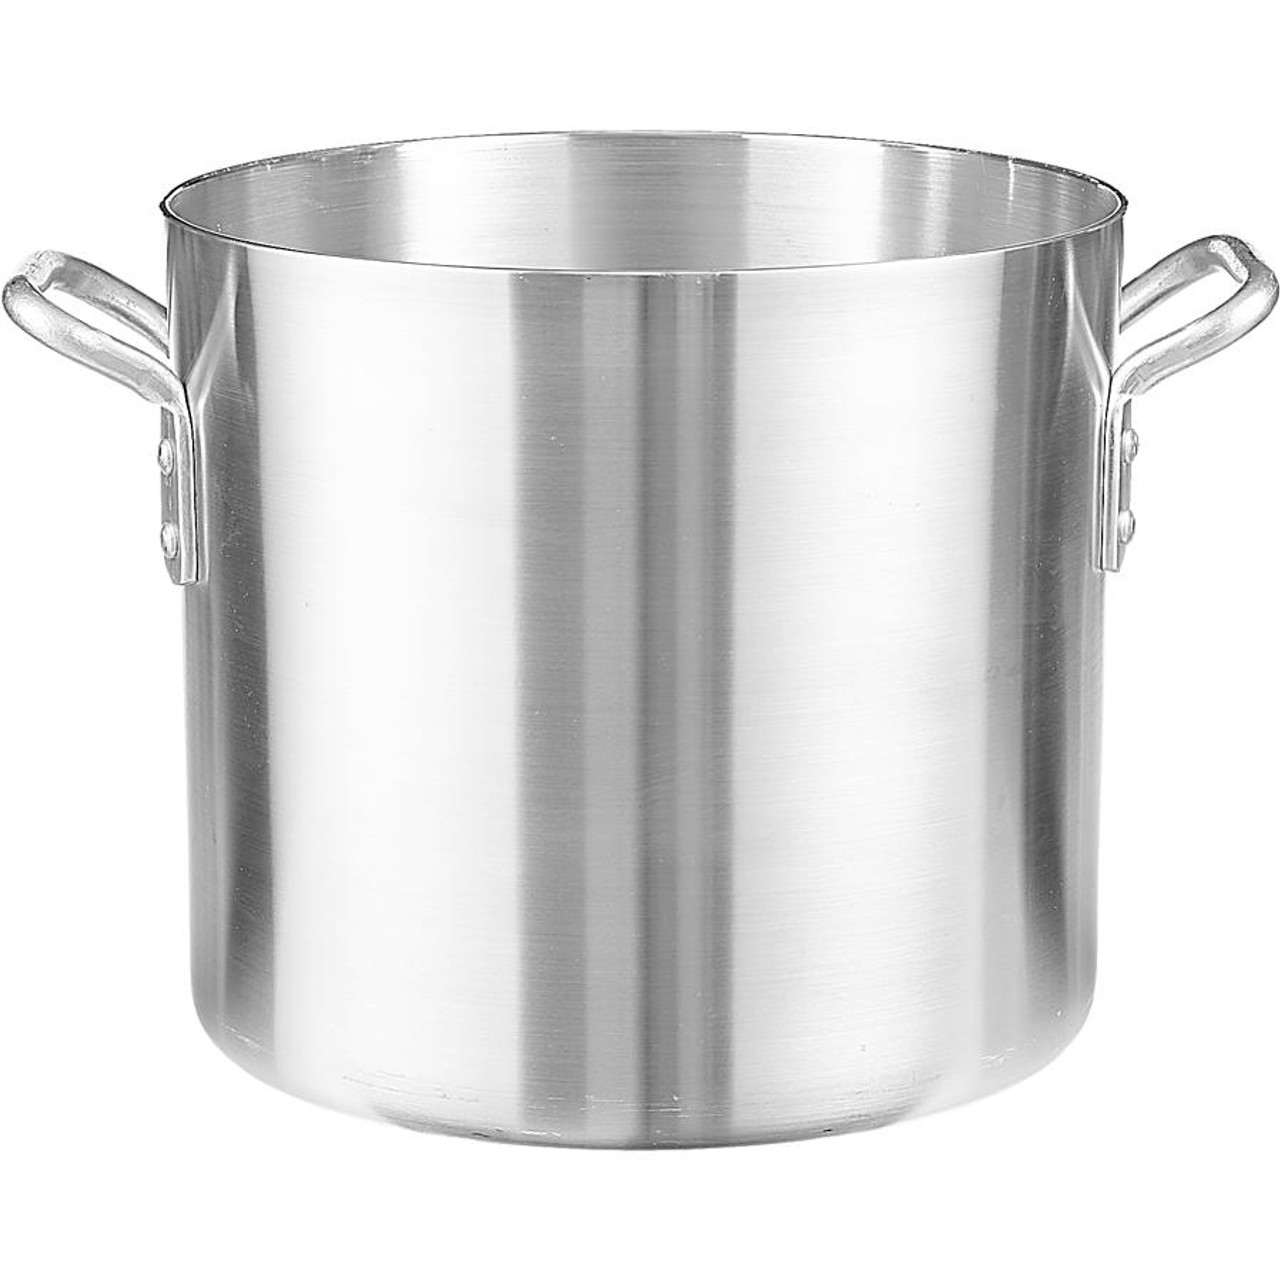 THERMALLOY Aluminum Stock Pot, 16 qt - Versatile and Durable Cookware for Your Kitchen 